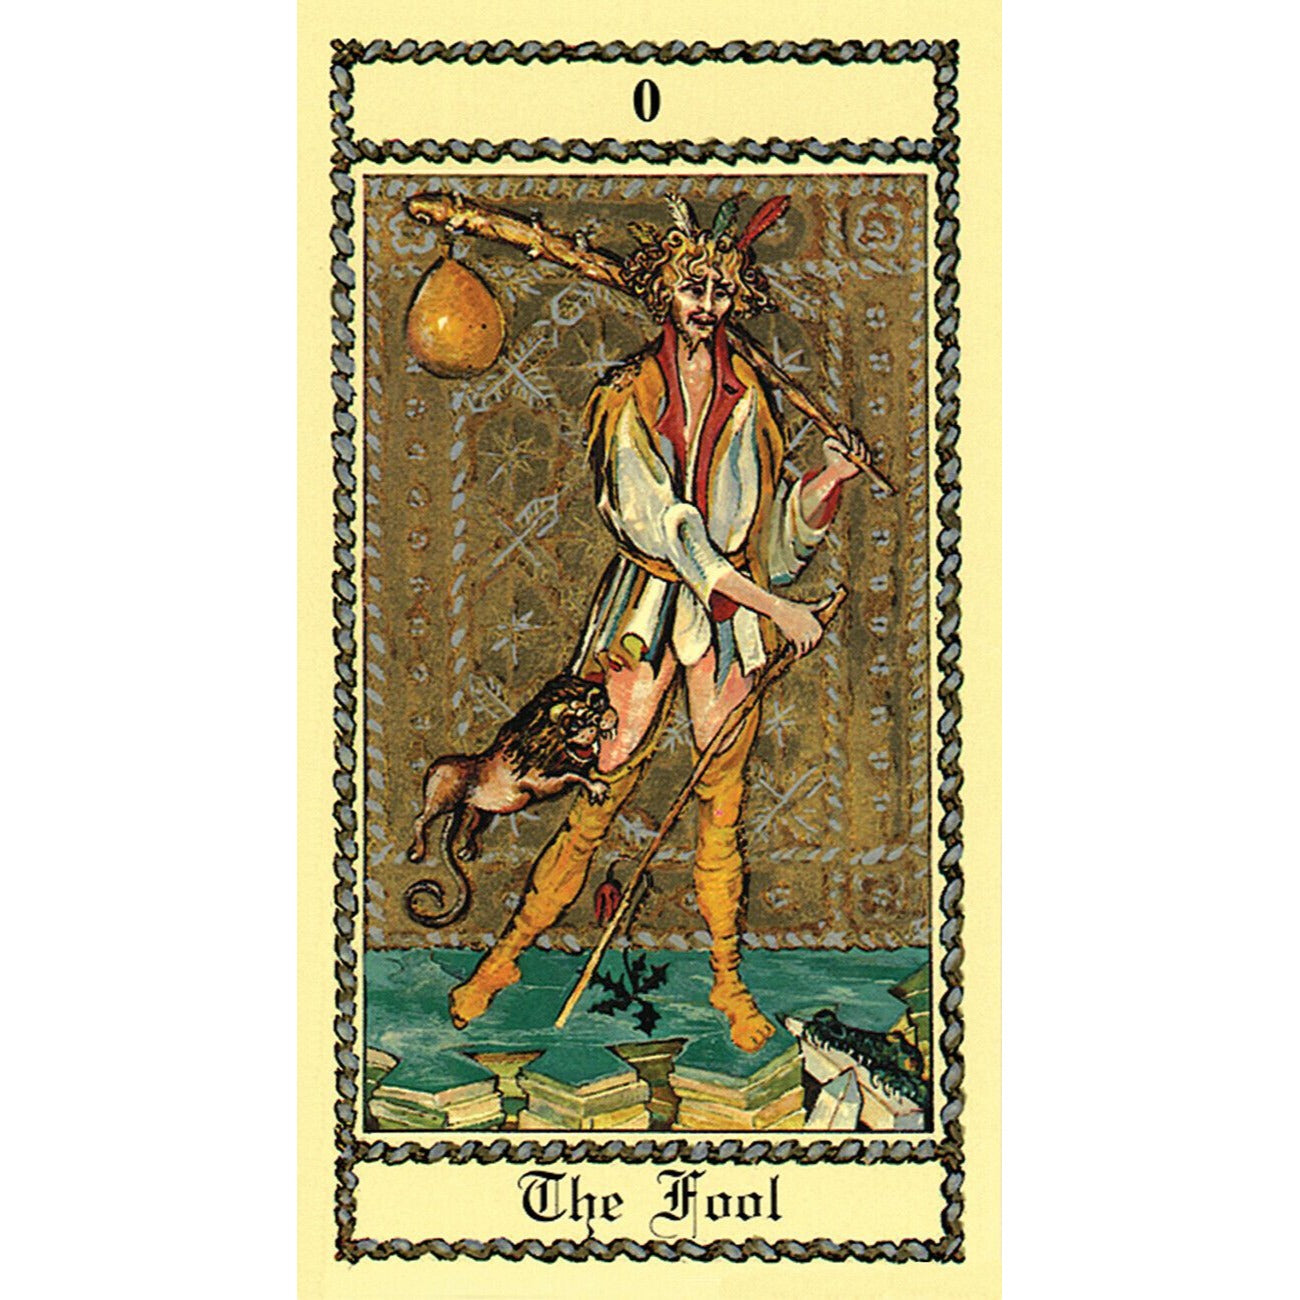 The Medieval Scapini Tarot